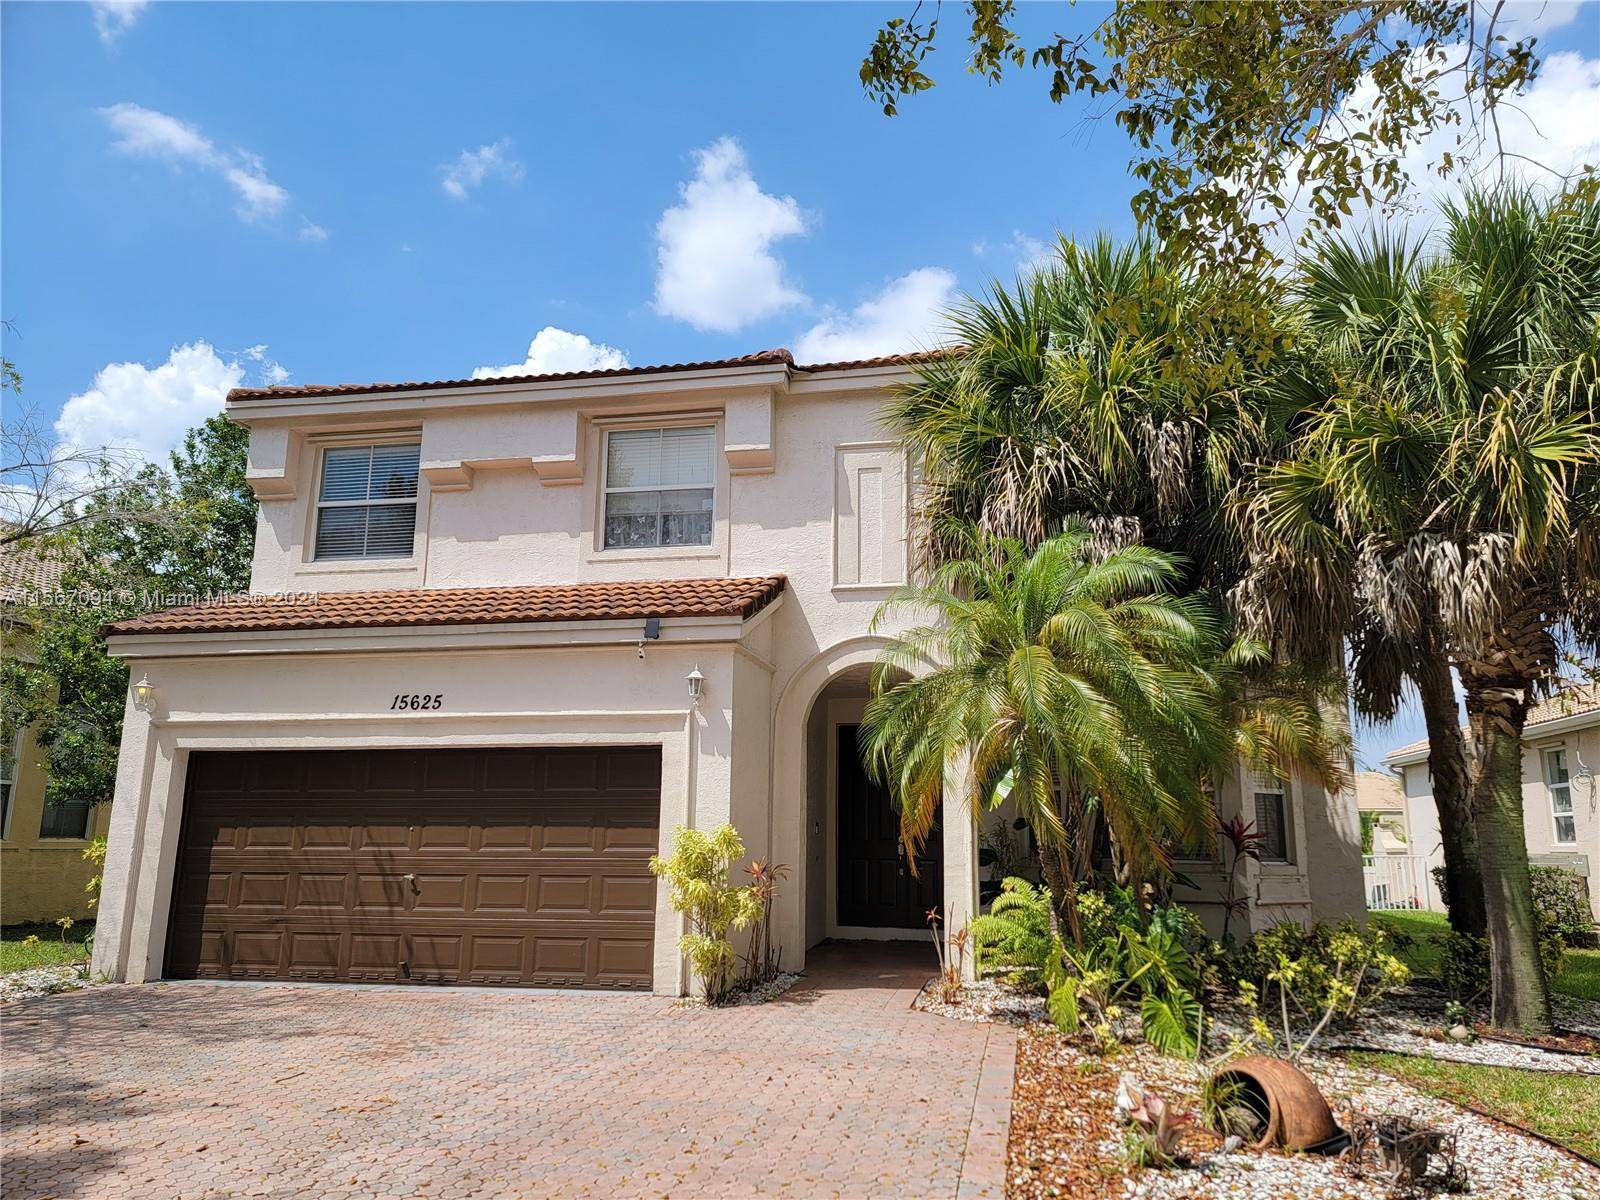 Fabulous home in a gated community in Riviera Isles with amazing lake view, 5 bedrooms 2.